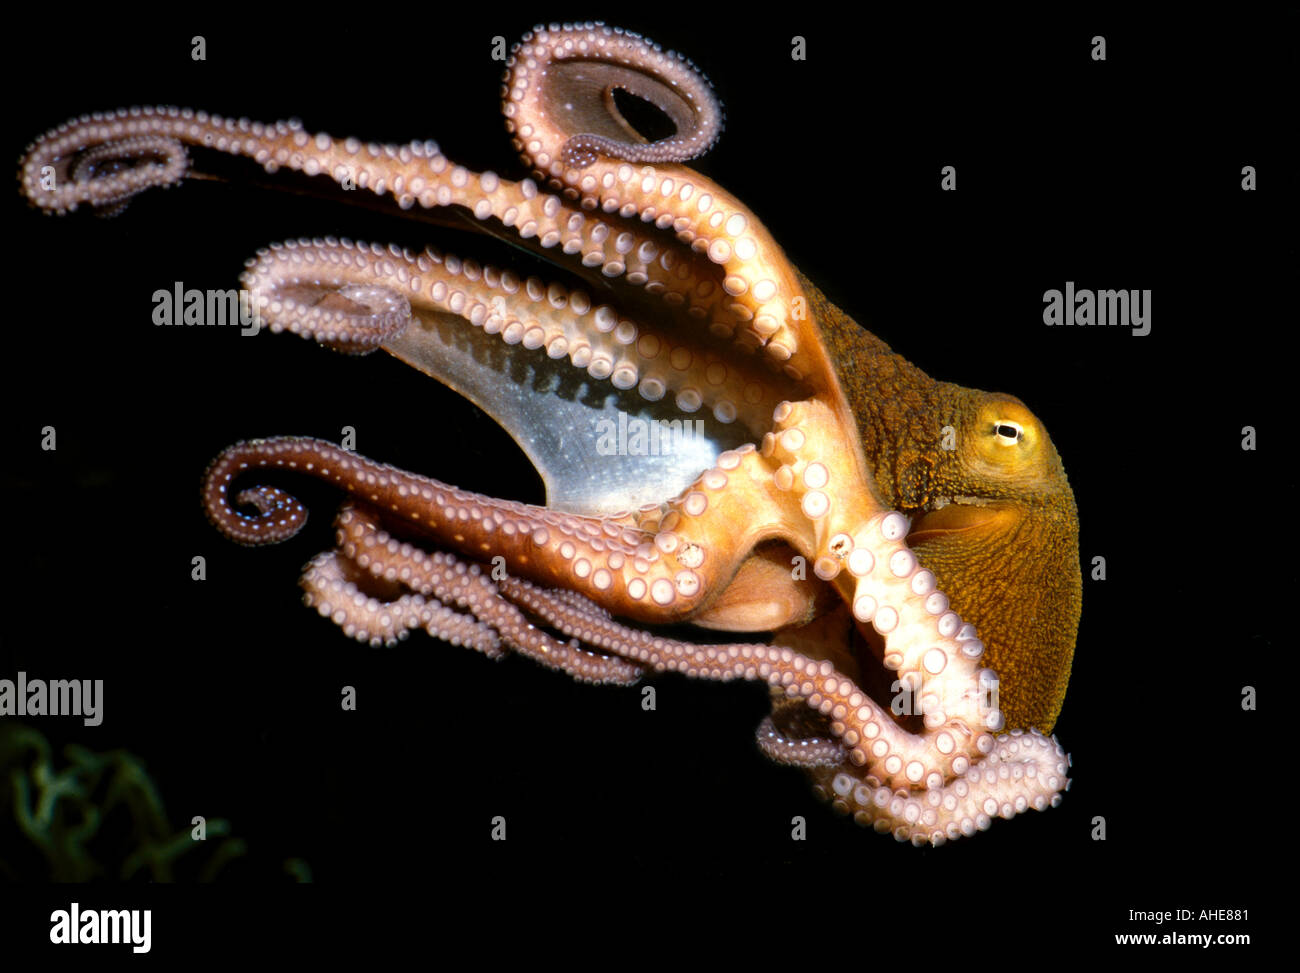 Octopus swimming eight tentacles with suckers visible Stock Photo